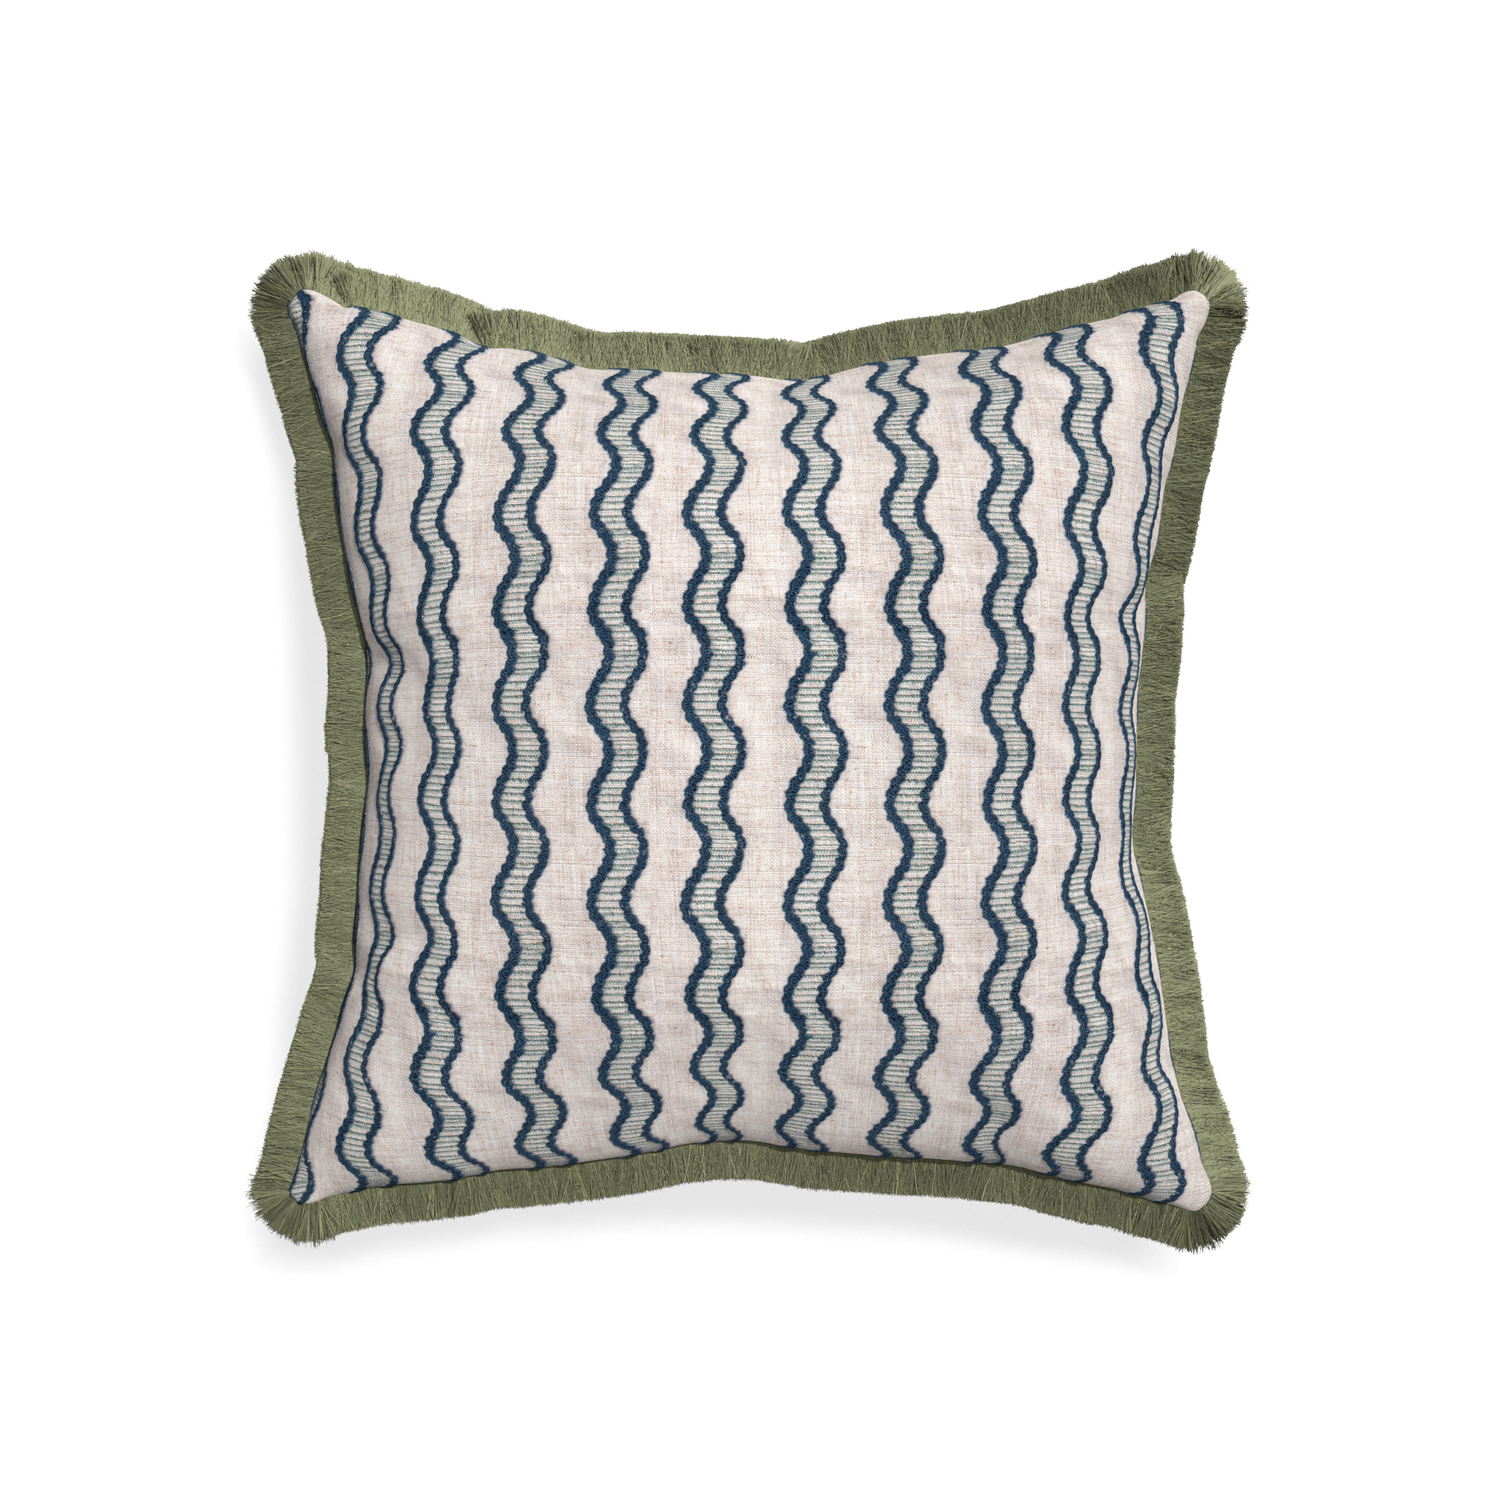 20-square beatrice custom embroidered wavepillow with sage fringe on white background